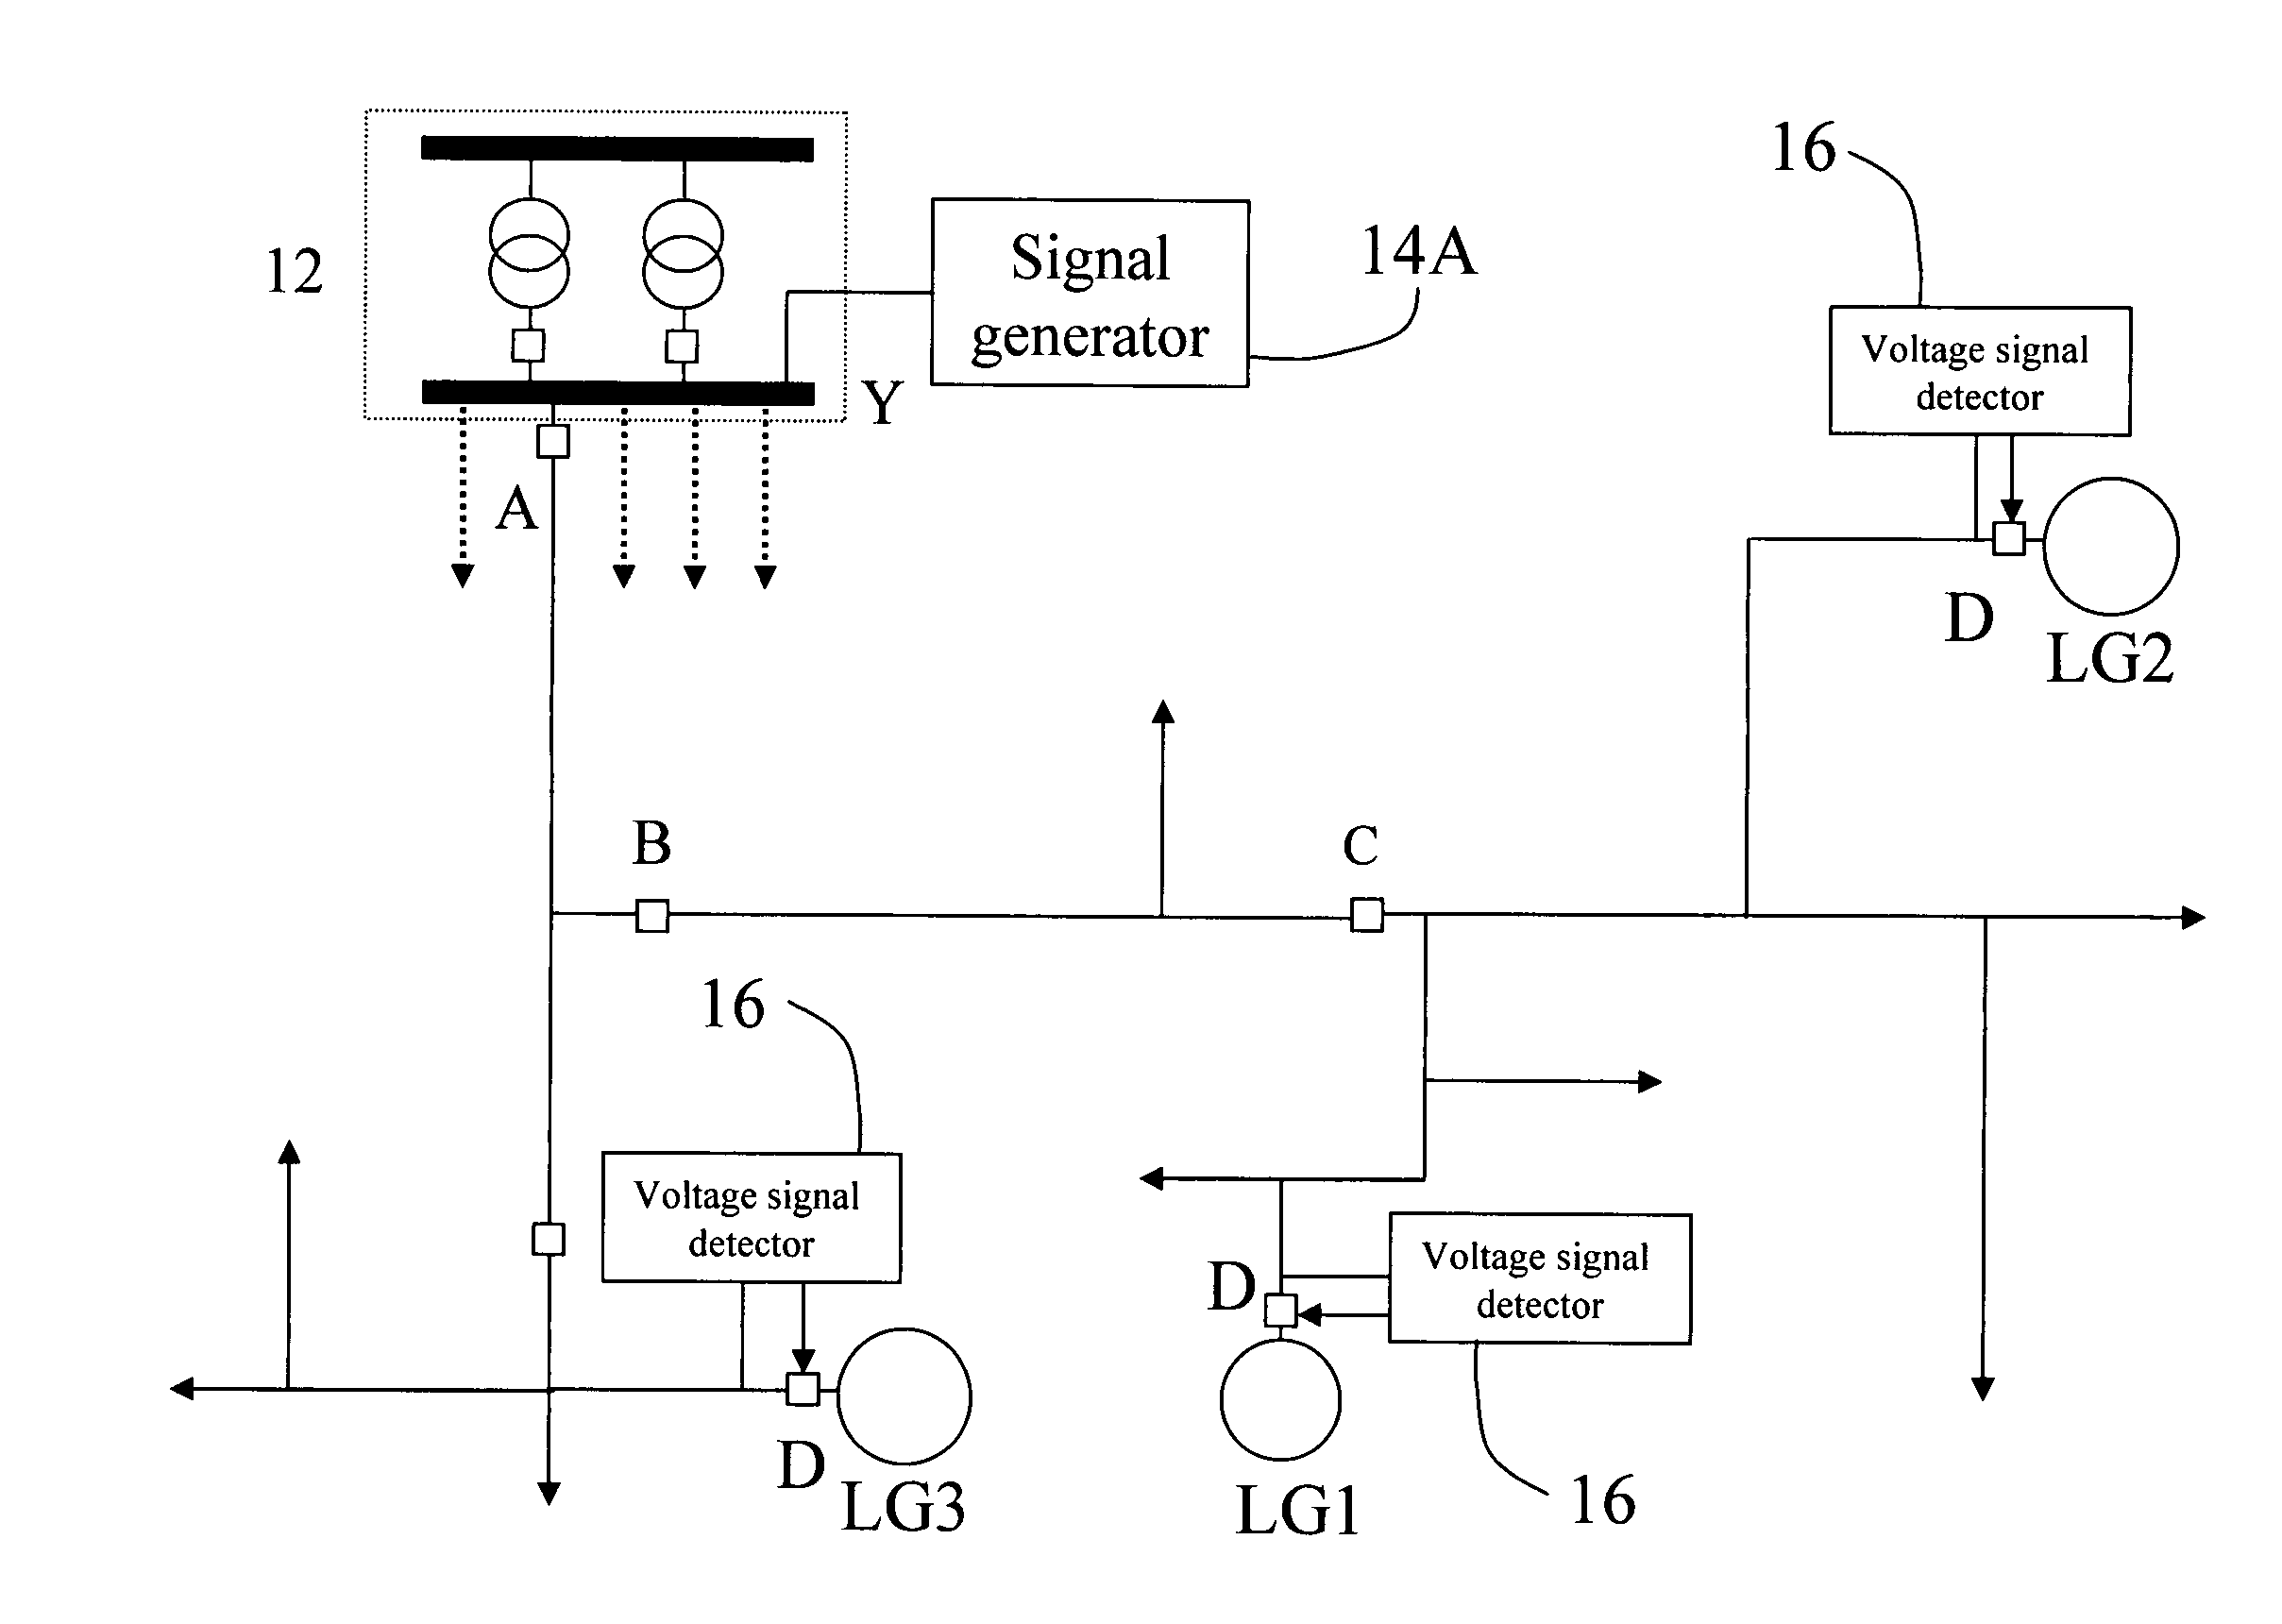 Power signaling based technique for detecting islanding conditions in electric power distribution systems